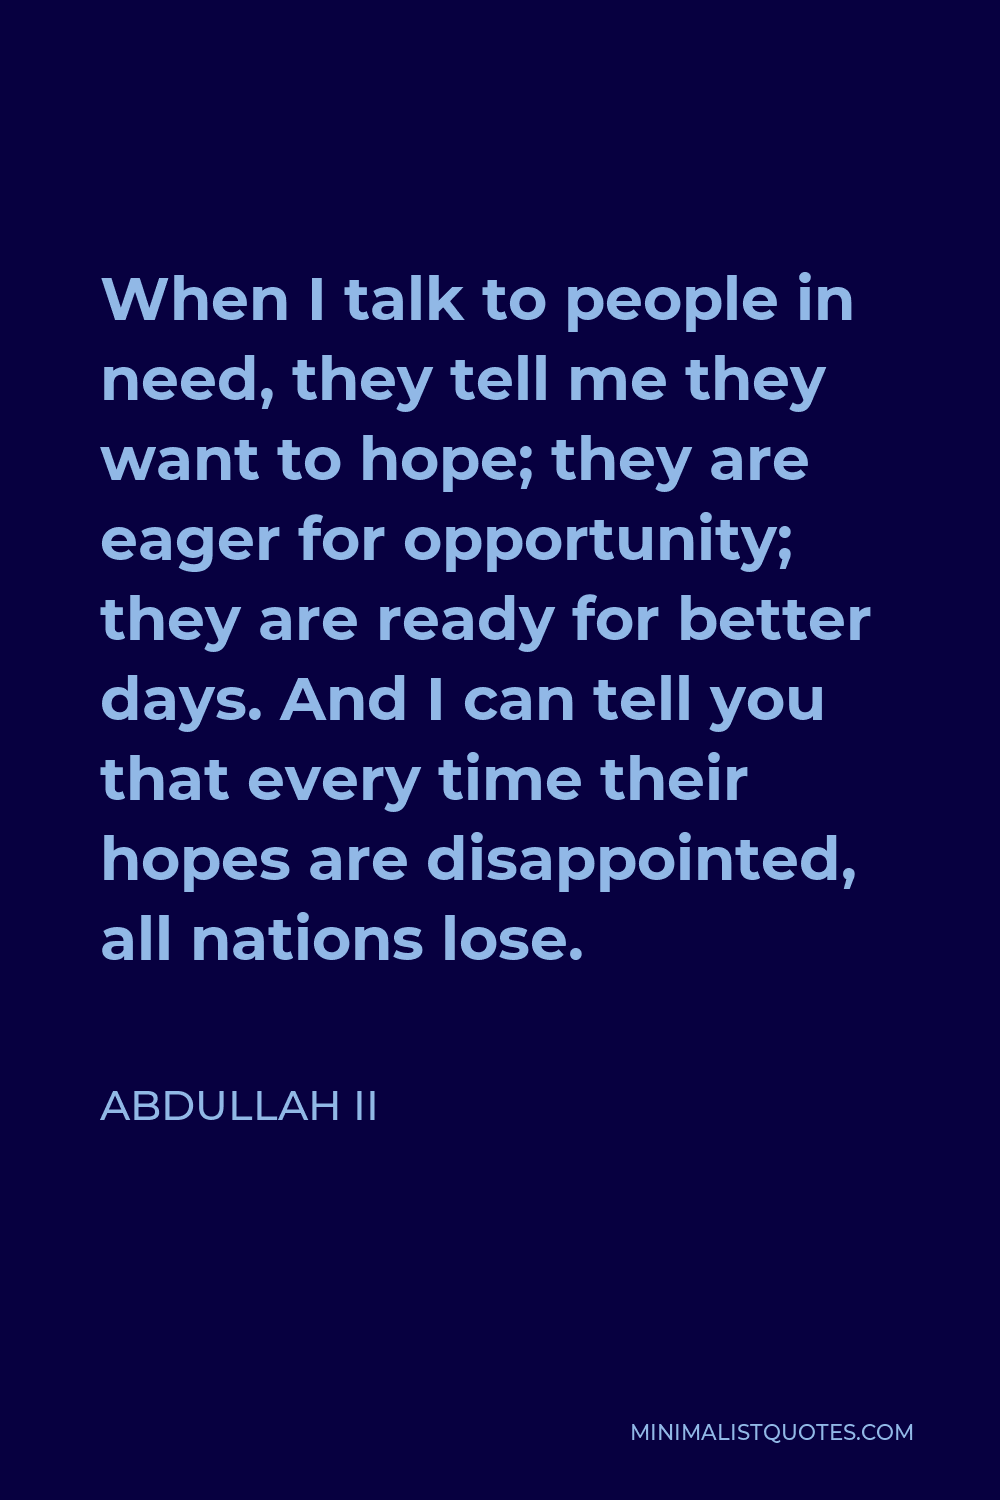 Abdullah II Quote - When I talk to people in need, they tell me they want to hope; they are eager for opportunity; they are ready for better days. And I can tell you that every time their hopes are disappointed, all nations lose.